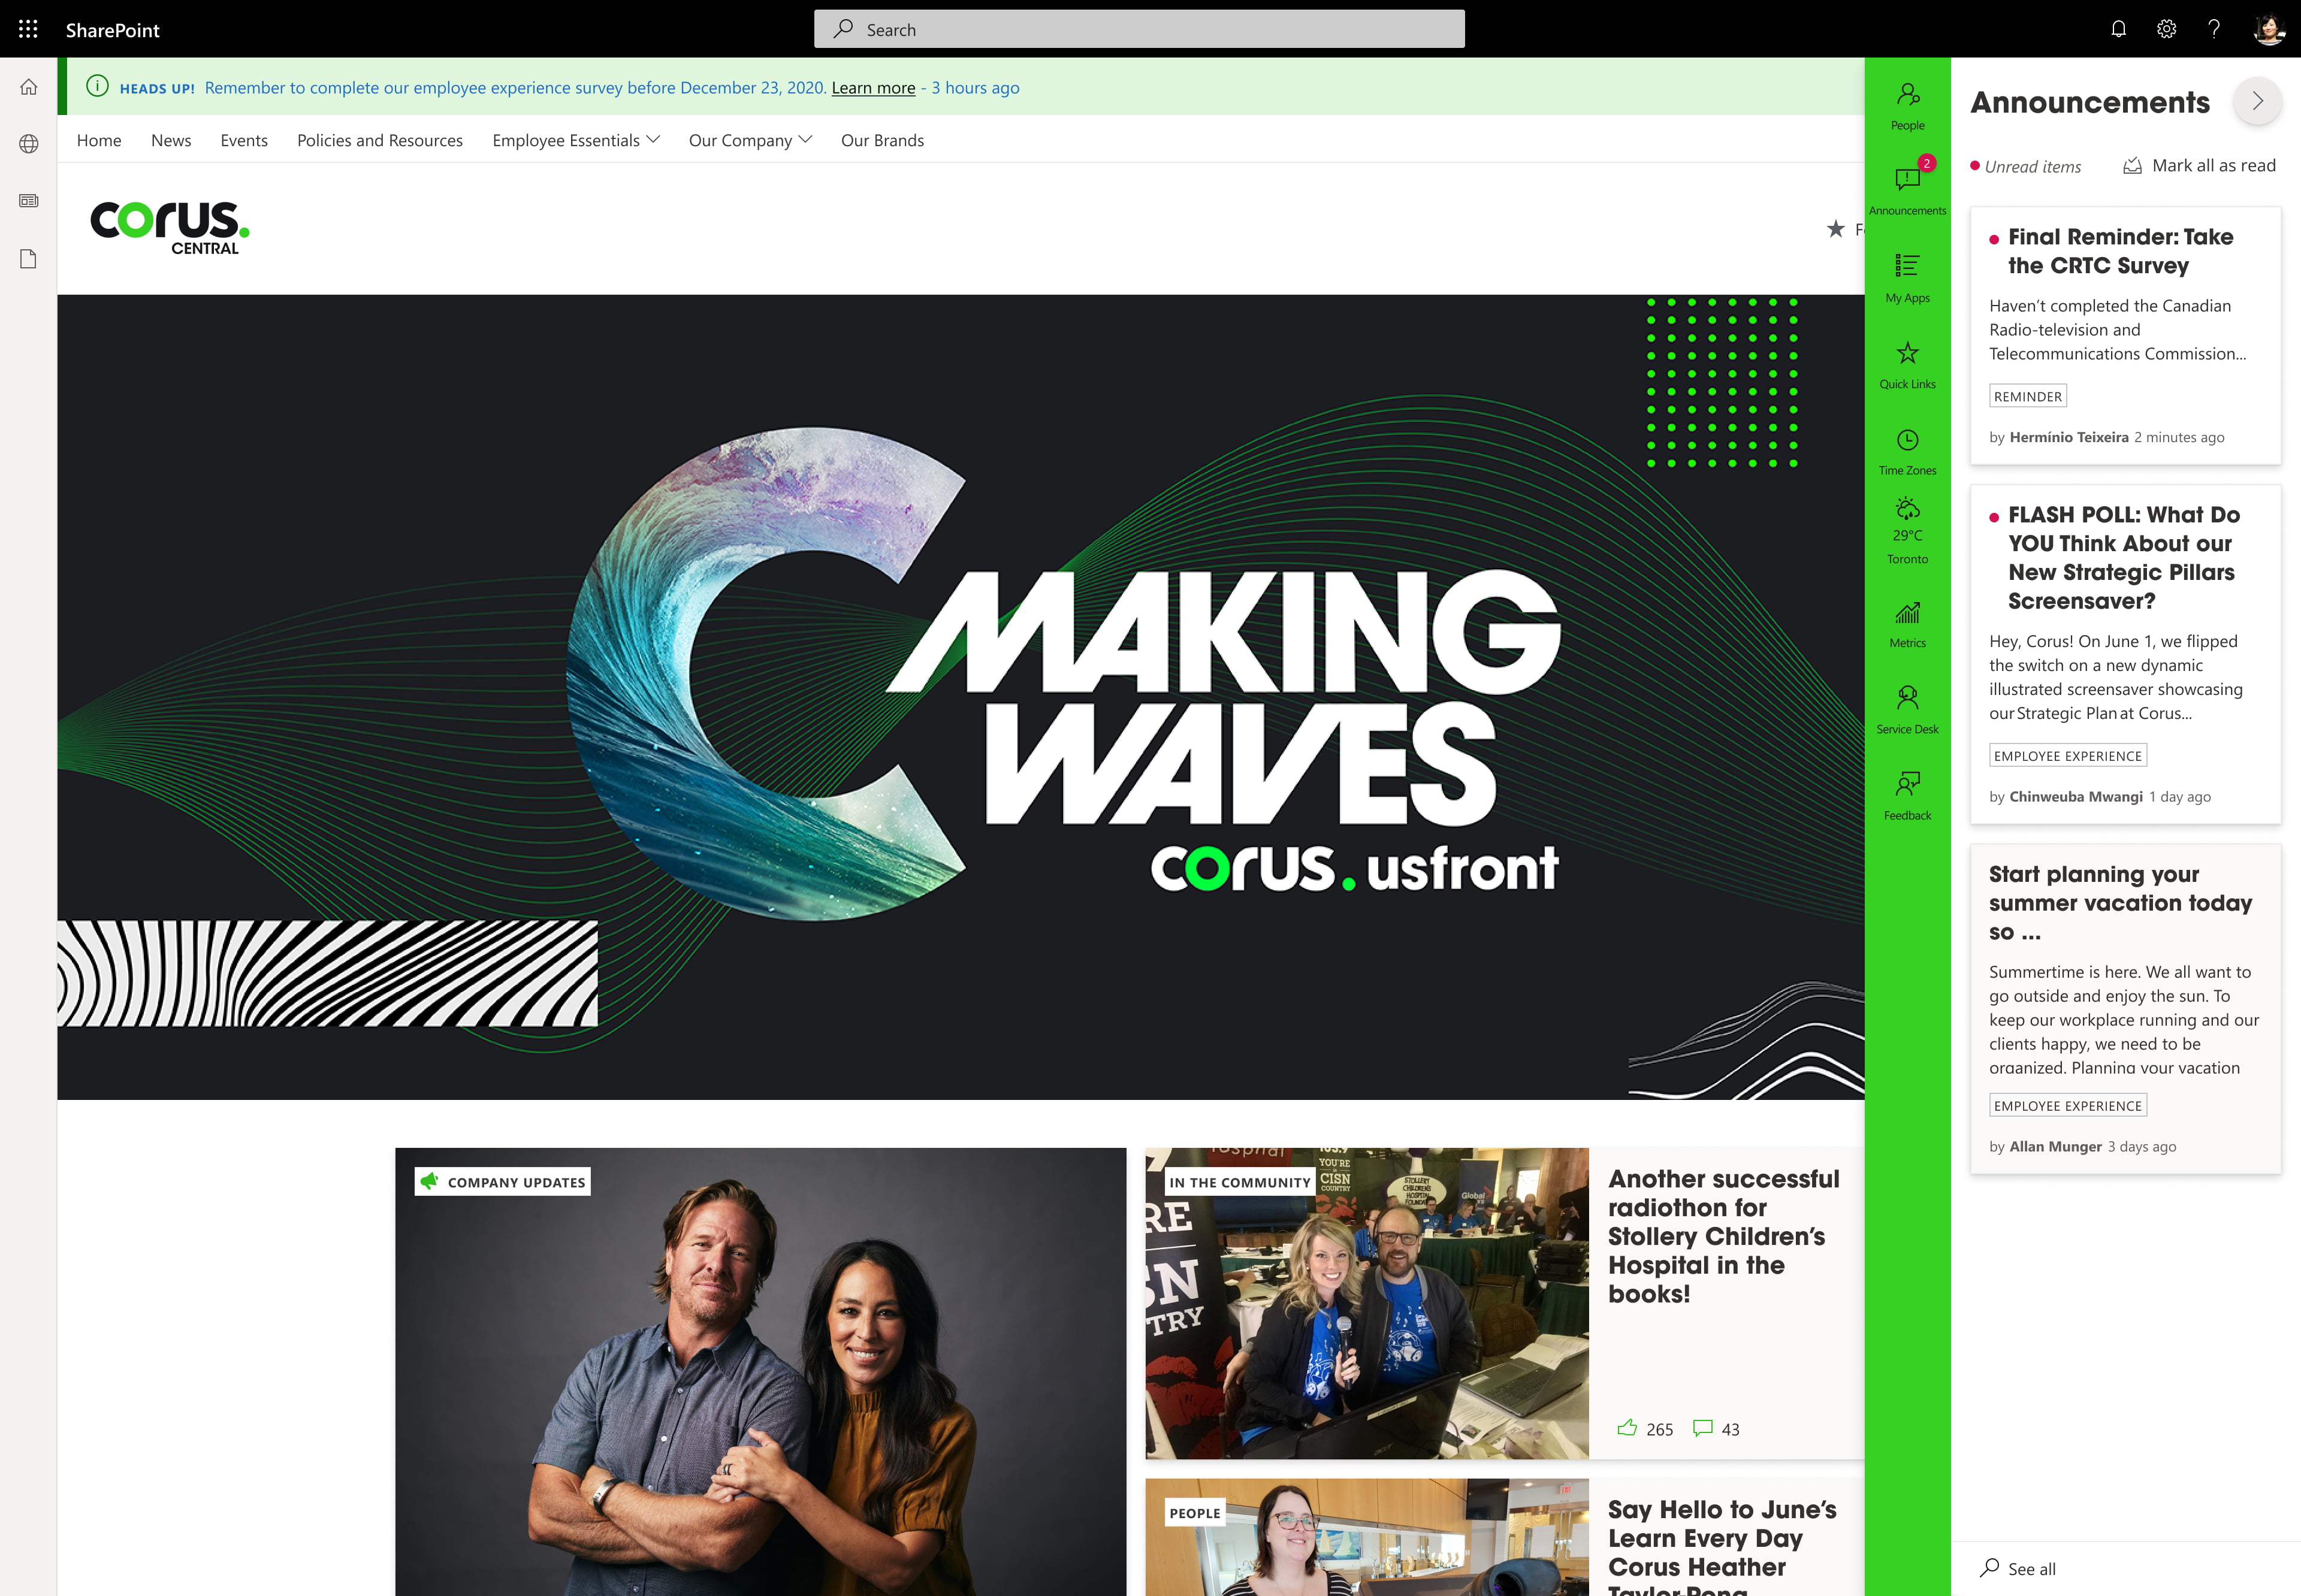 Screenshot of the home page of Corus's intranet, built on GO, featuring a large banner image, some news and a side bar panel showing the most recent announcements.